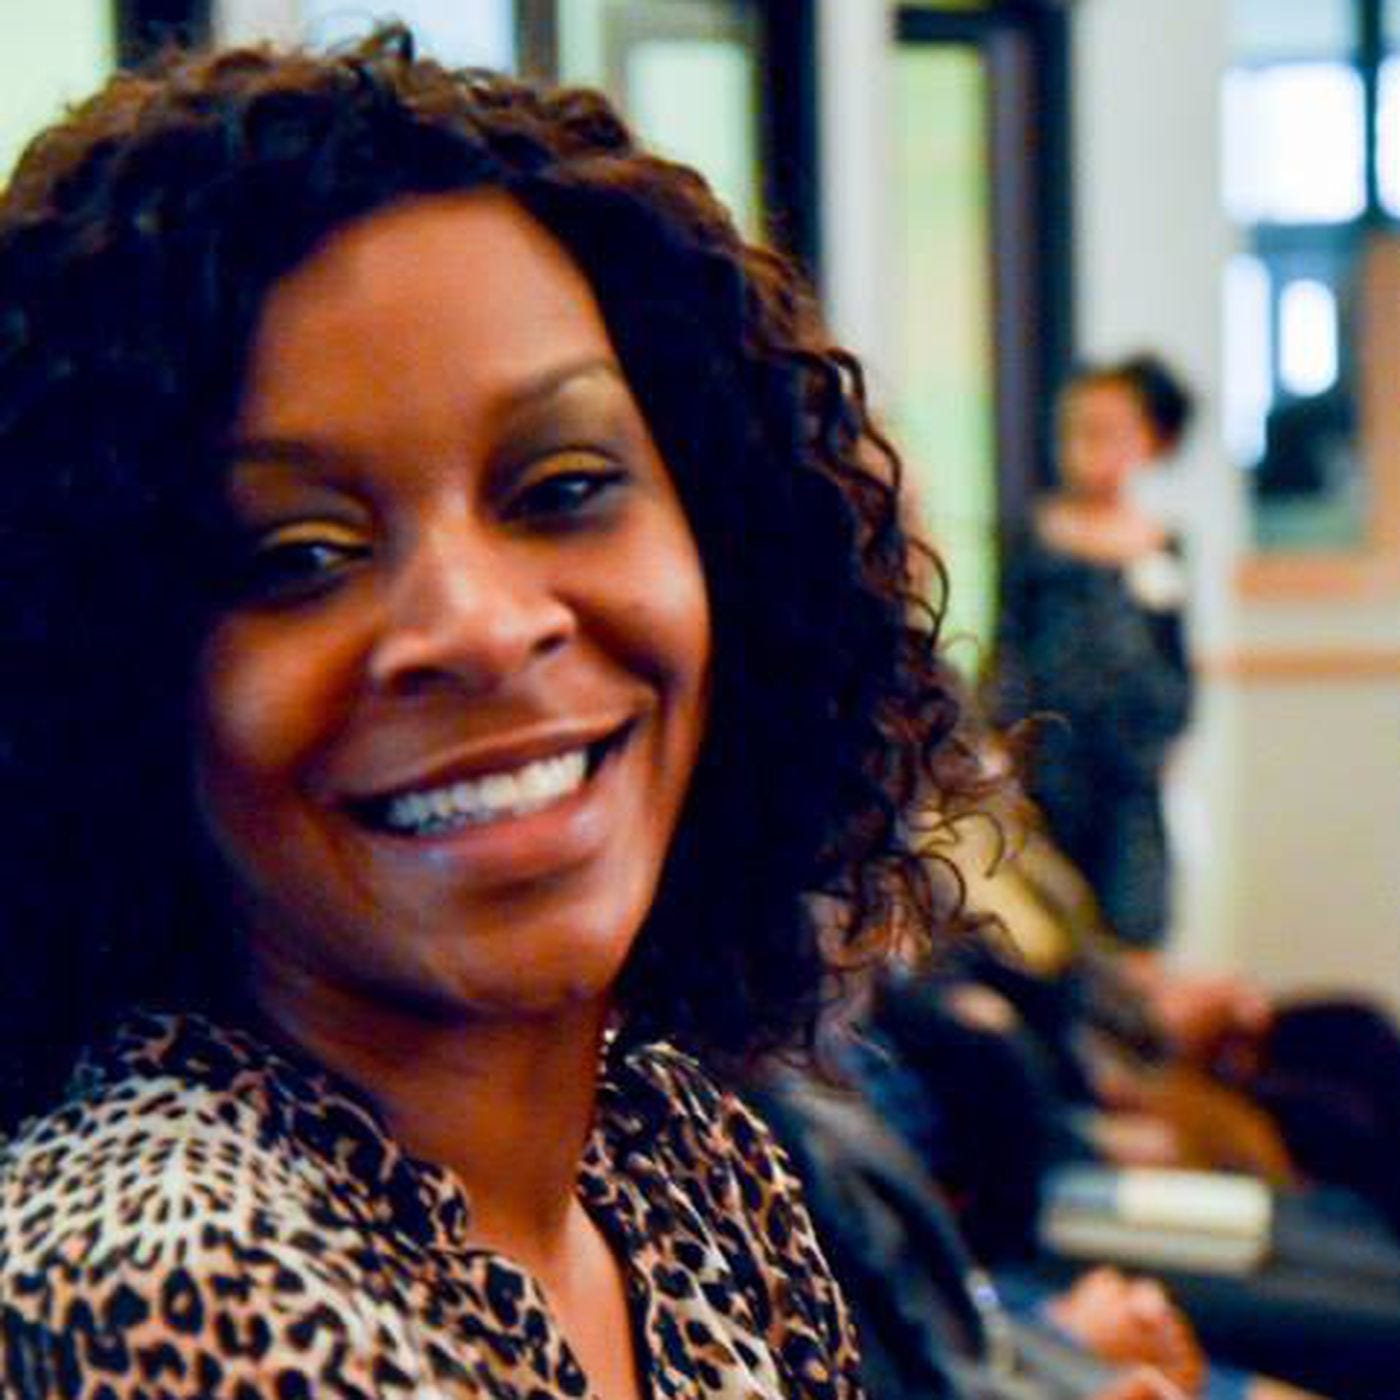 Sandra Bland's death in jail: what we know - Vox